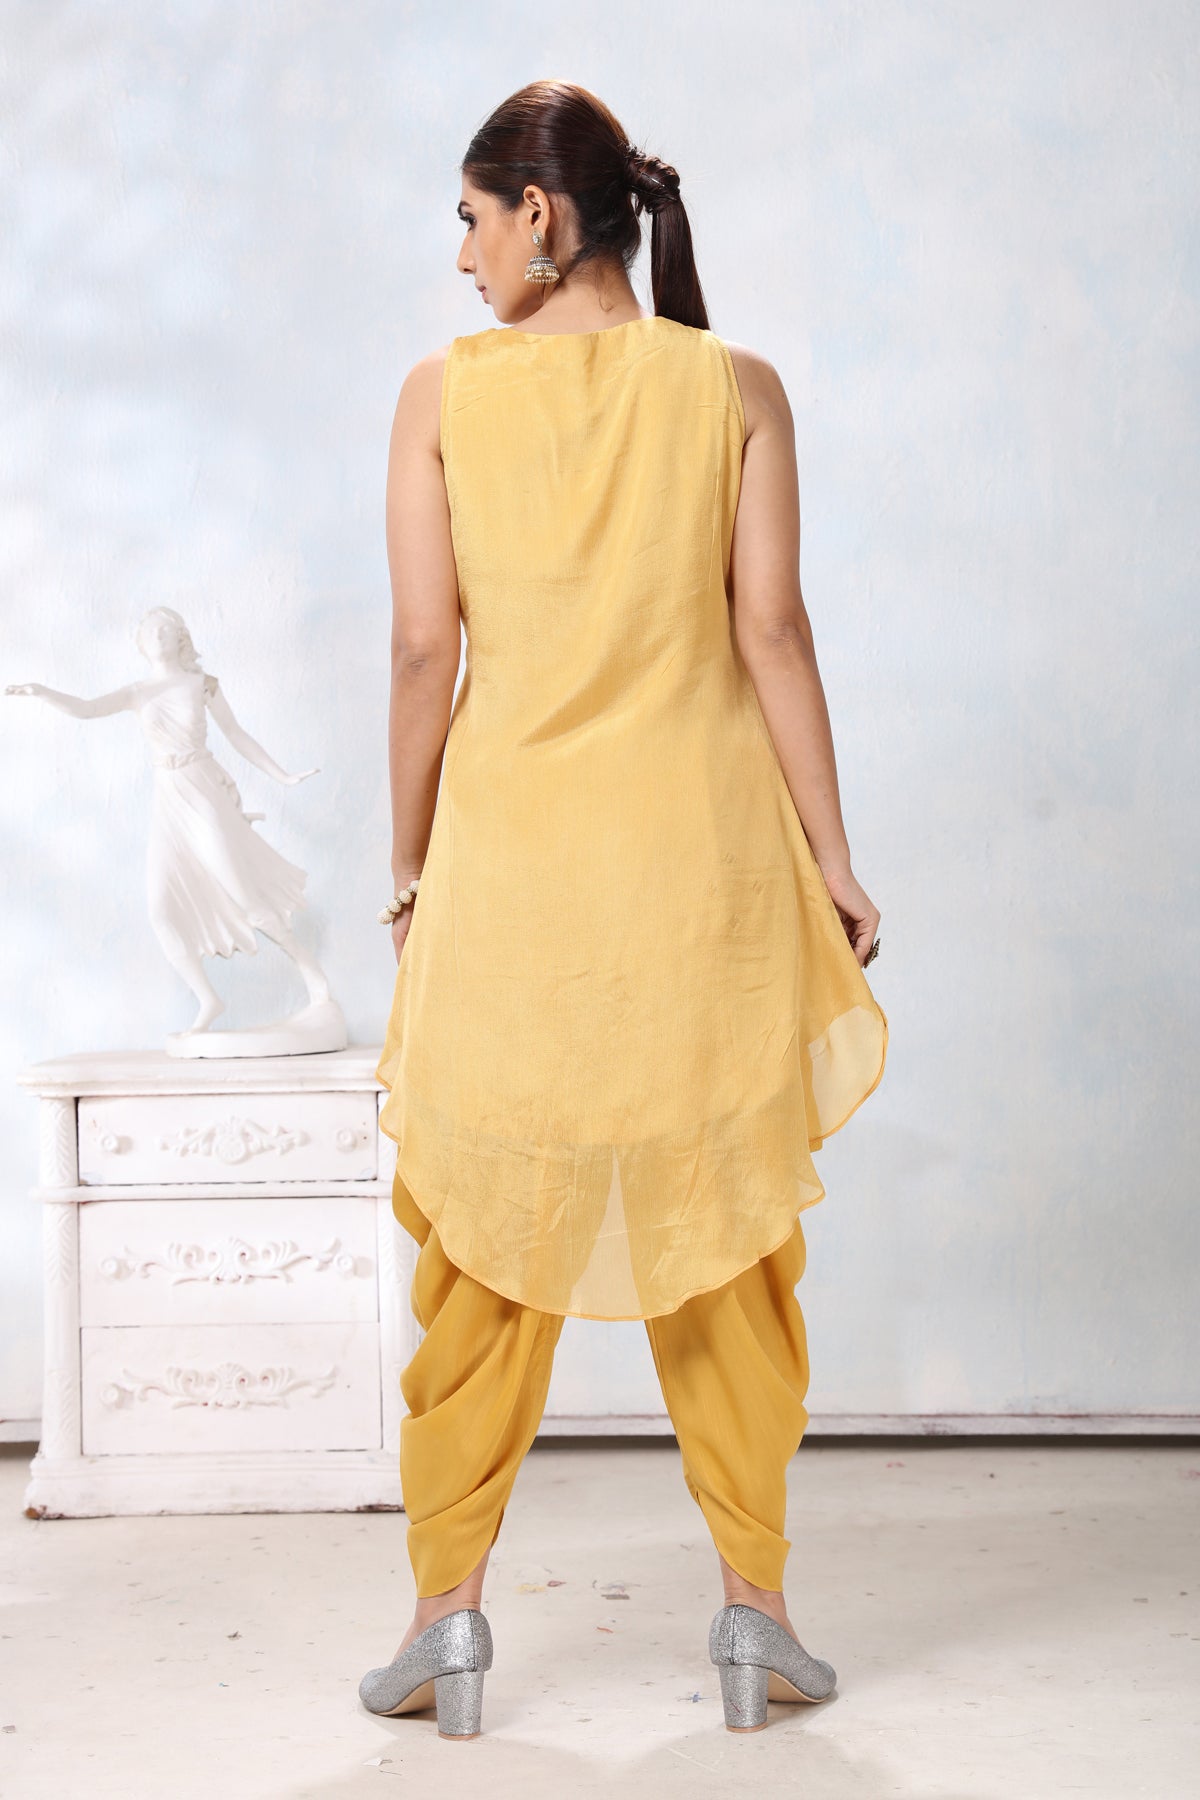 Lovely Outfit for Girl and Women Yellow Dhoti Saree Saree Suit Designer  Dhoti Saree Women Clothing Indian Designer Traditional Dhoti Saree - Etsy  Singapore